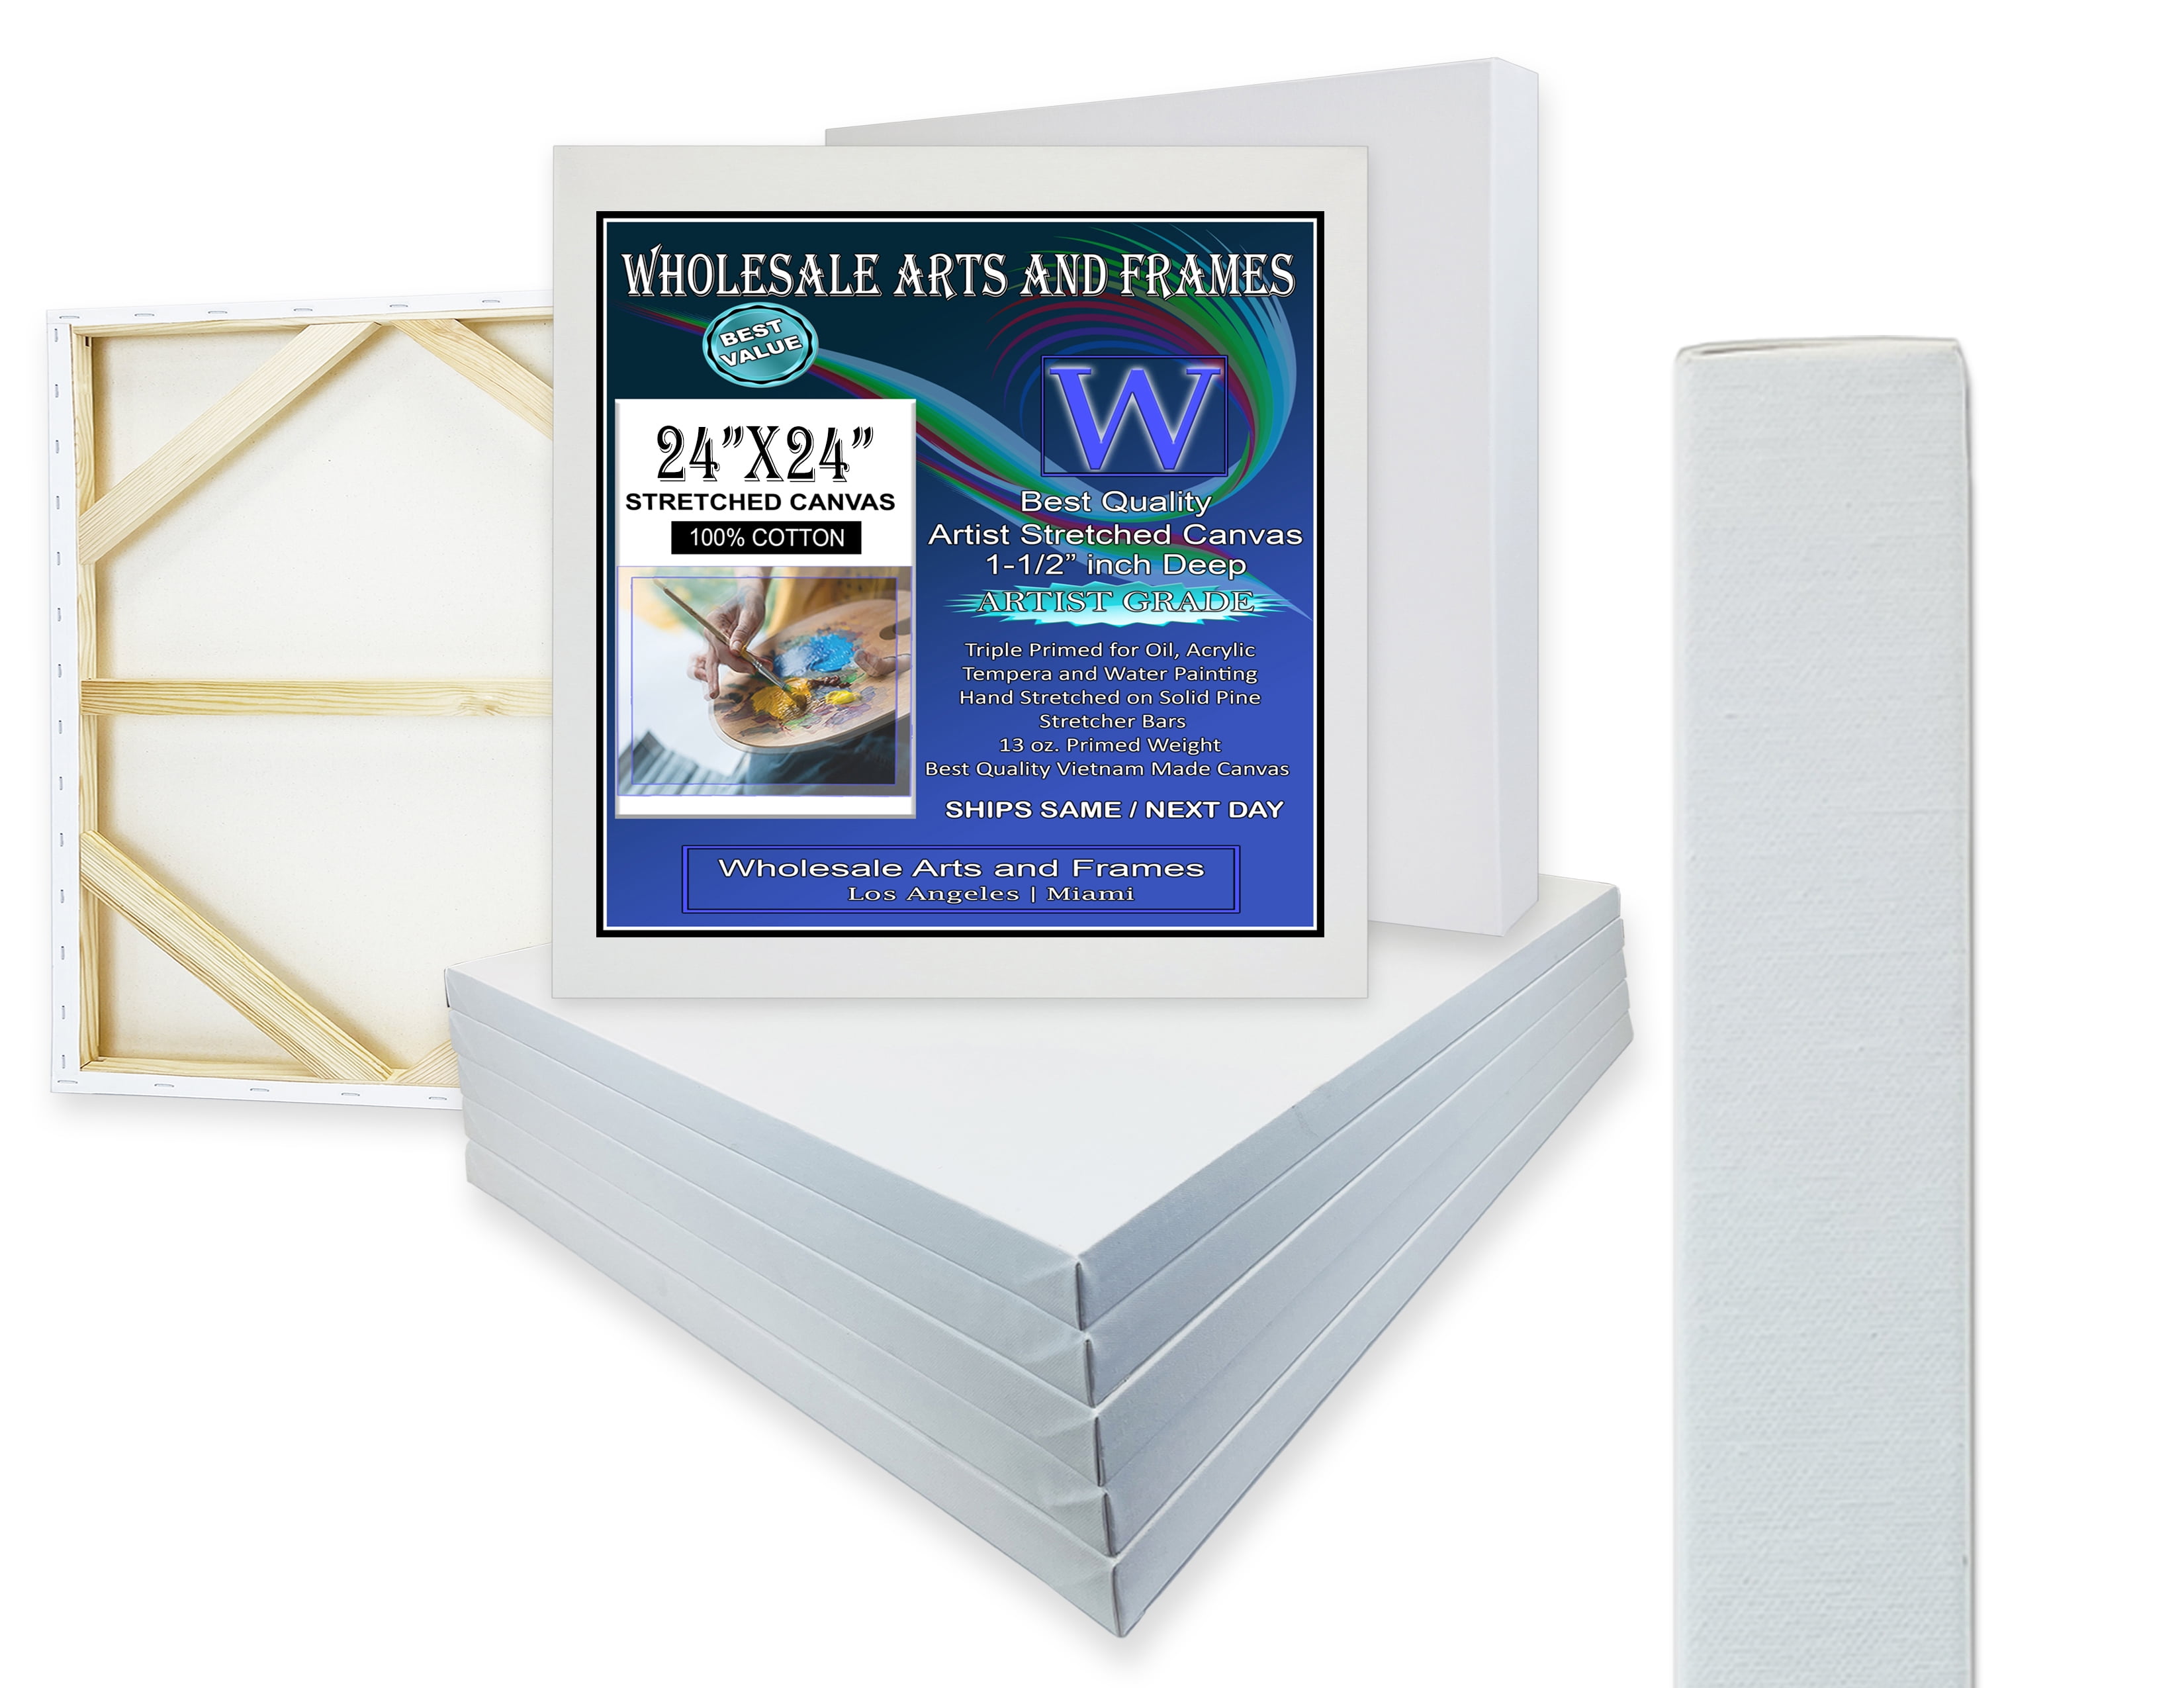  Pre Stretched Cotton Canvas, 12x12 Inch, 7 Pack of Triple  Primed Blank White Artists Canvases, Art Supplies for Painting, Acrylics,  and Oil Paint